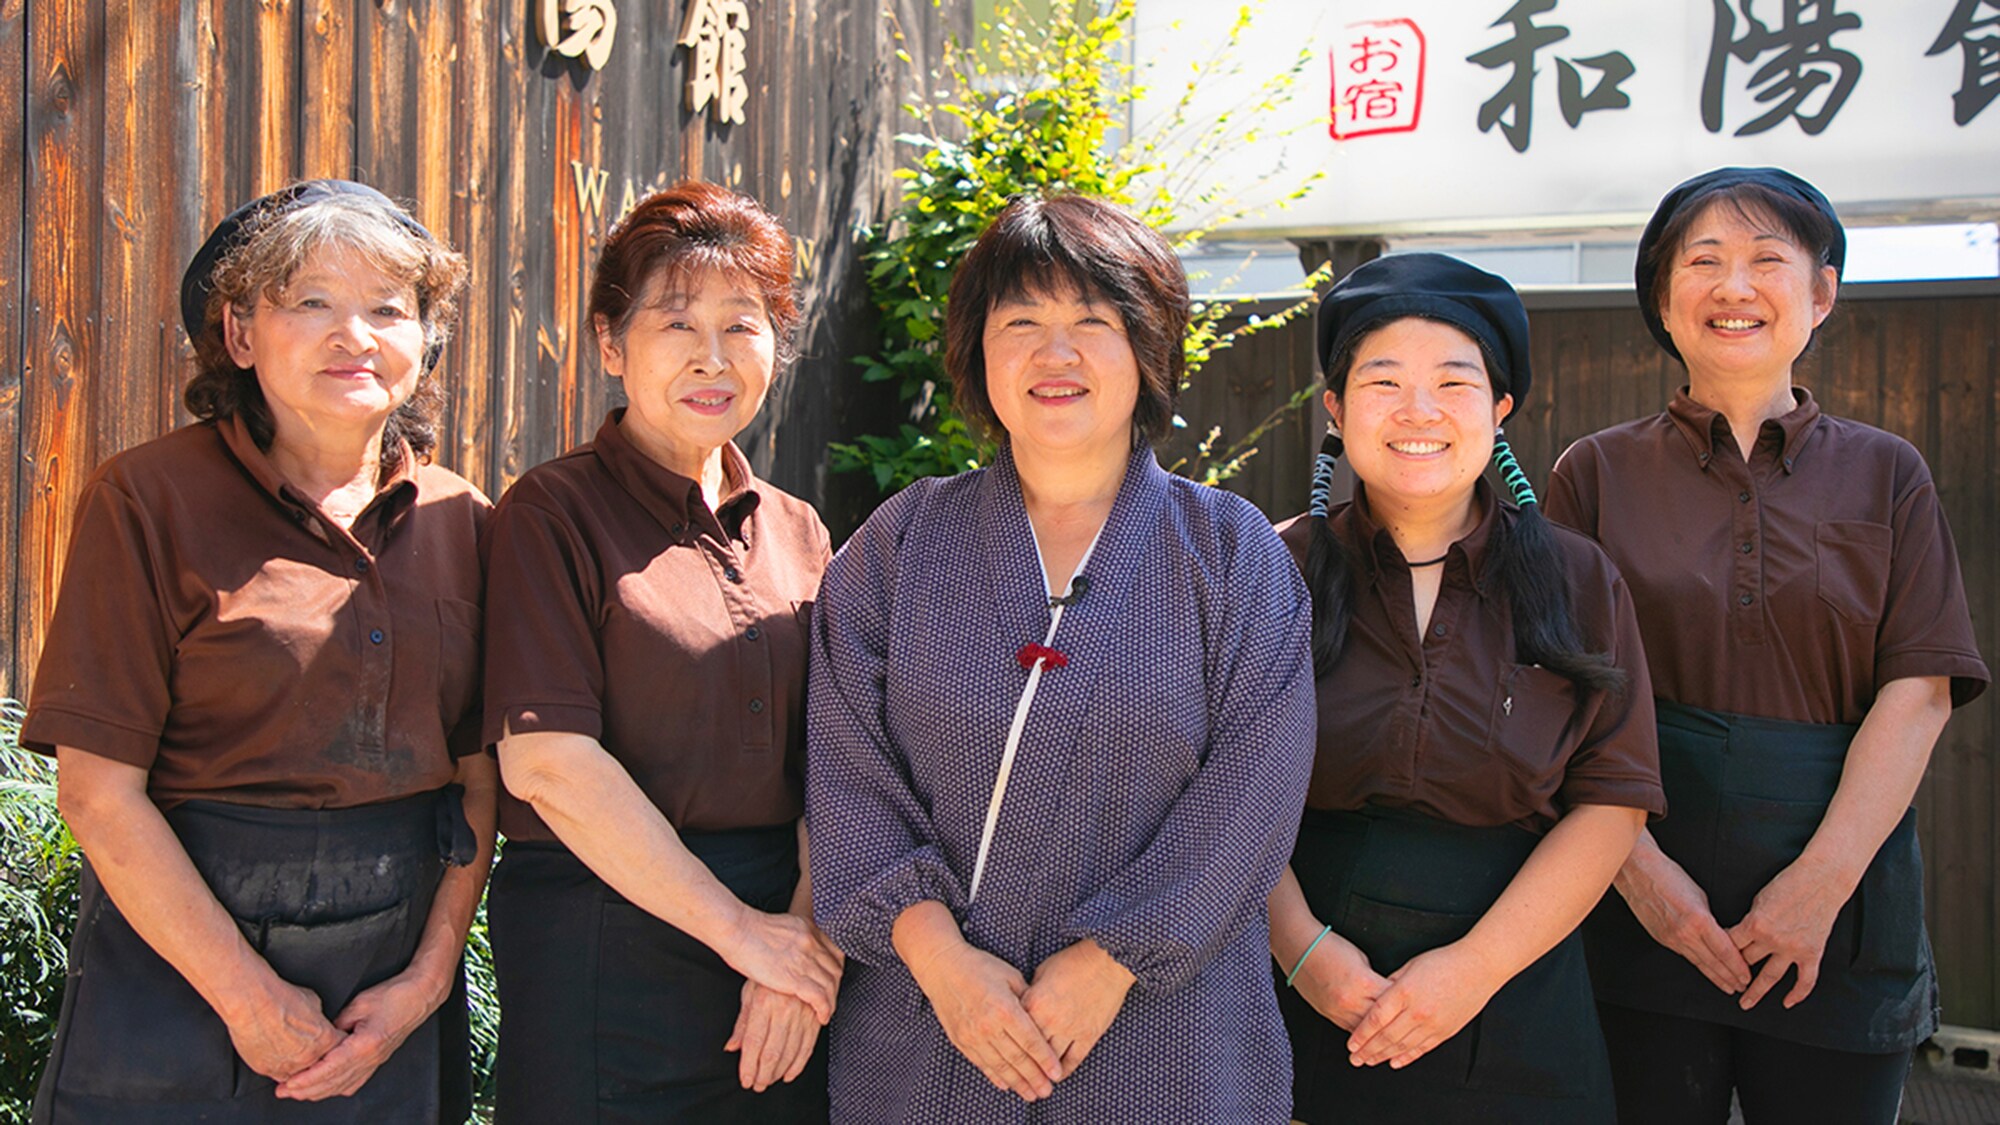 ■ Staff ■ "Welcome" We will welcome you with warm customer service ♪